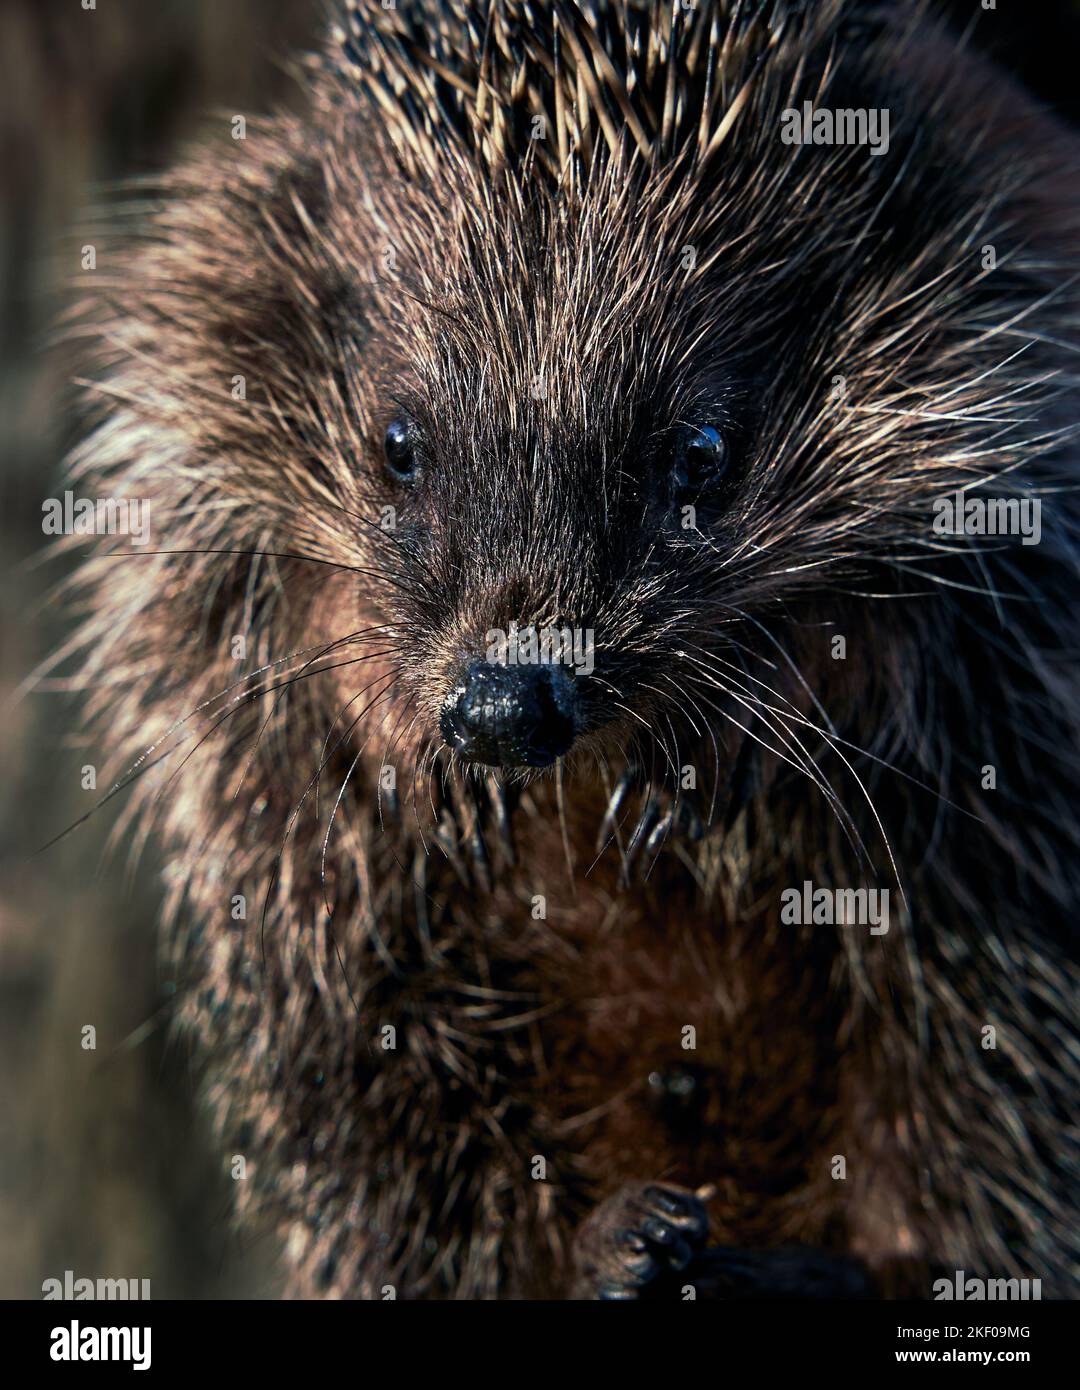 Close-up portrait of a young cute hedgehog Stock Photo